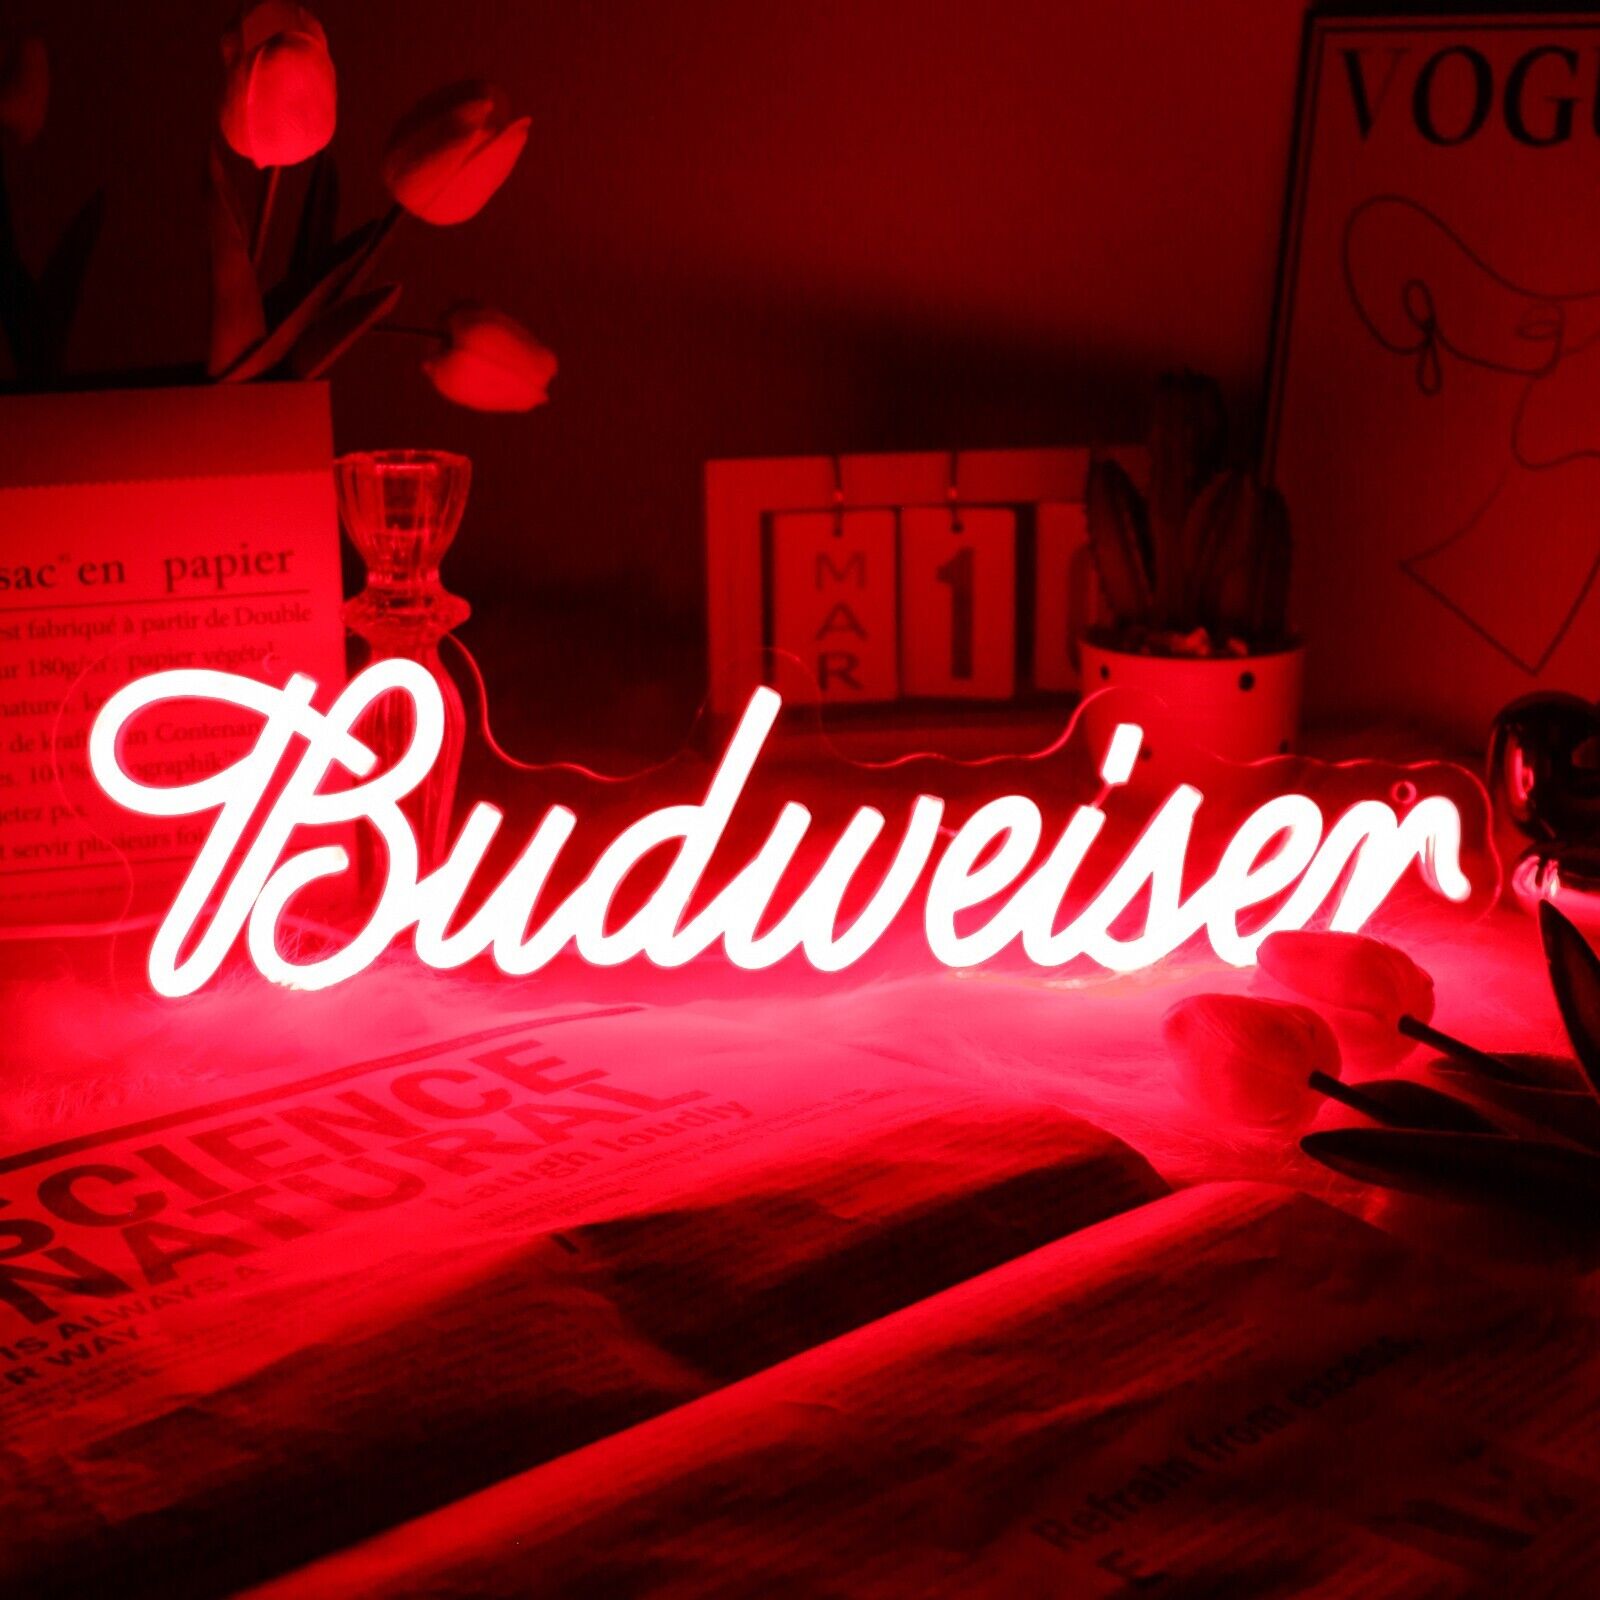 LED Budweiser Neon Sign, Dimmable Bar Decor for Man Cave, Home Bar, Club, Party